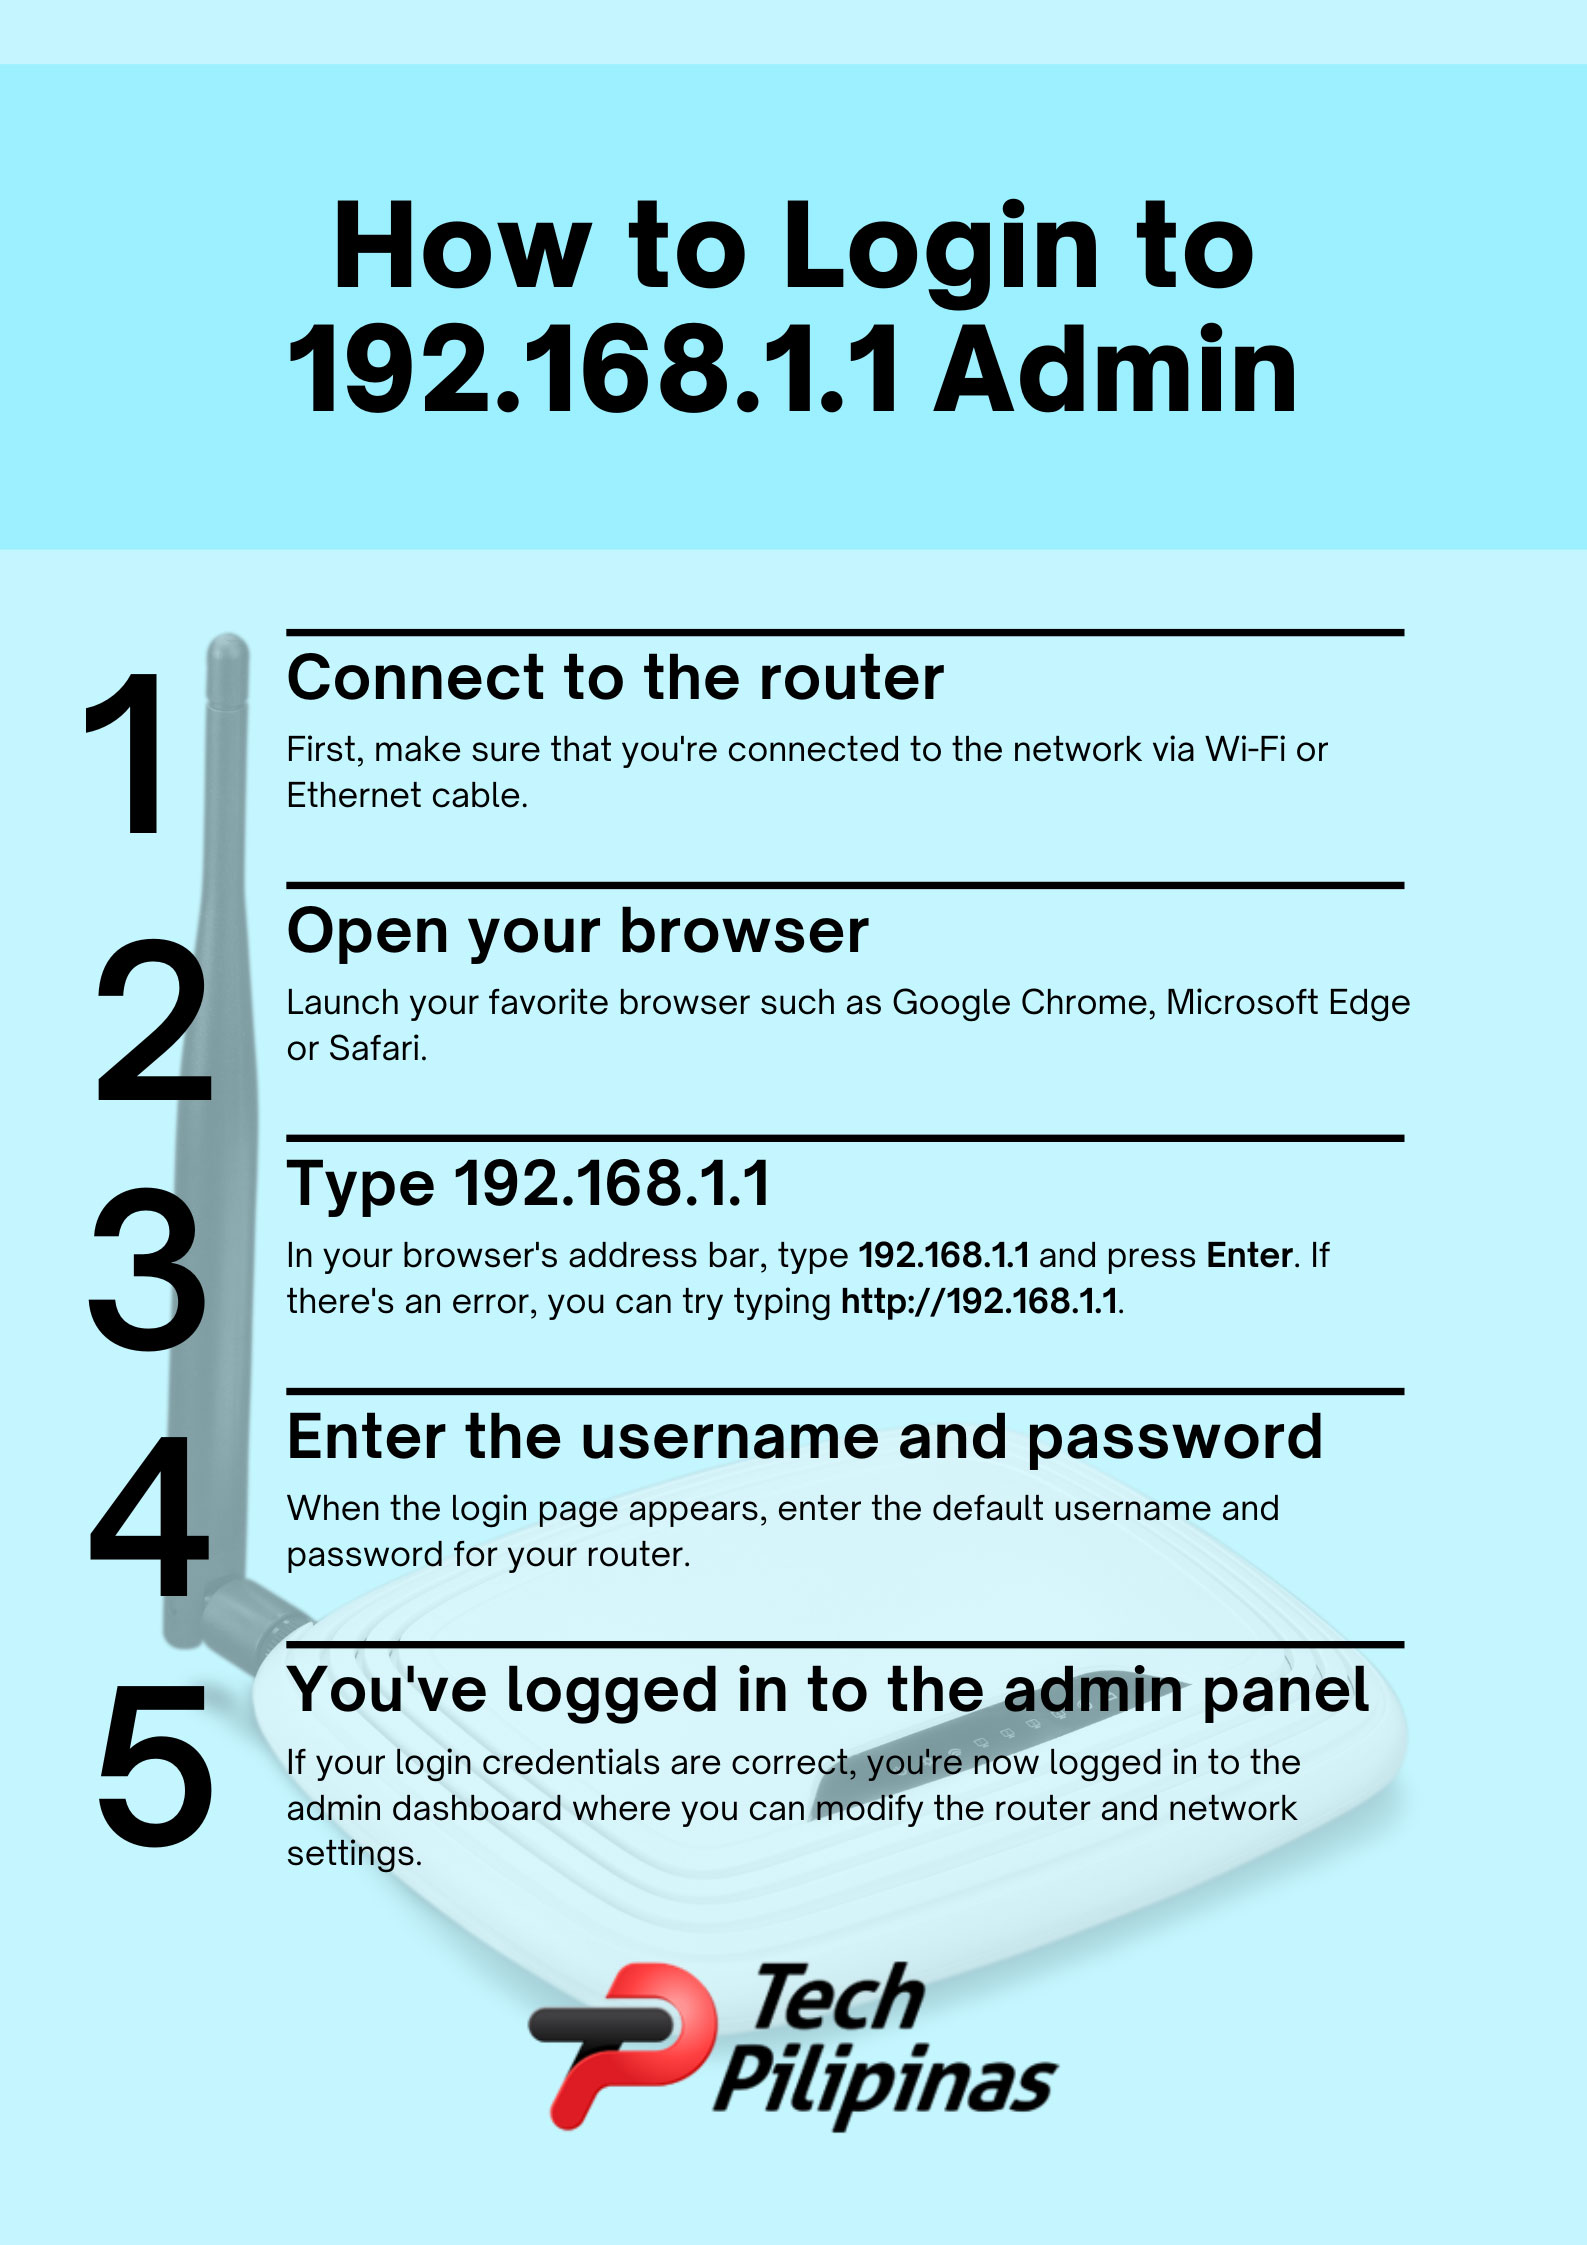 How to login to 192.168.1.1 admin